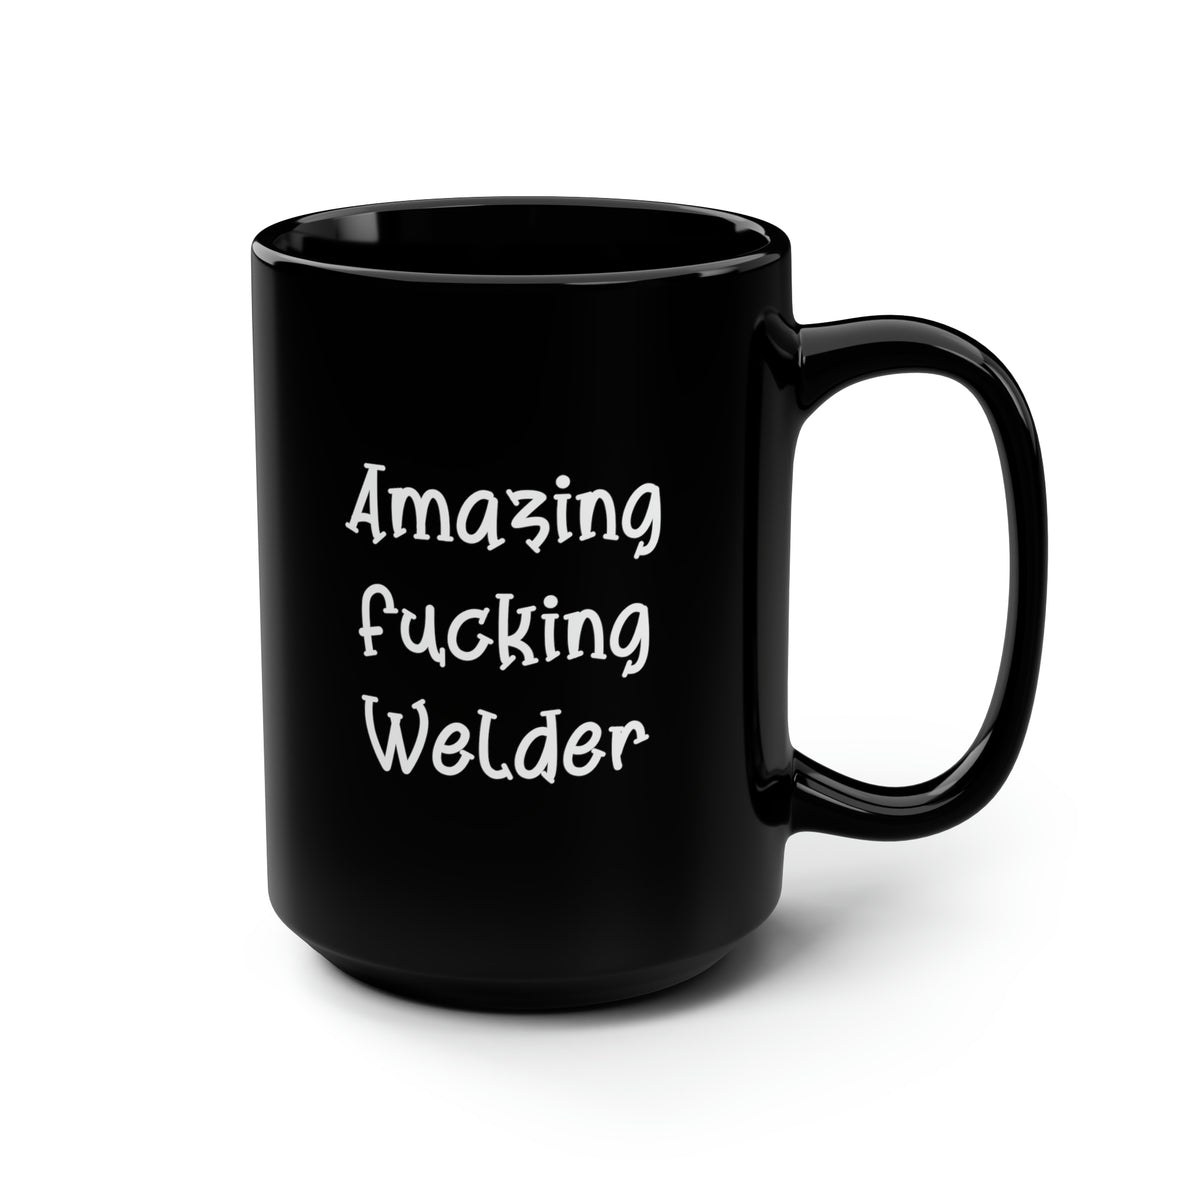 Unique Idea Welder Gifts, Amazing Fucking Welder, Cool 15oz Mug For Colleagues From Boss, Gifts for boss, Boss gift ideas, Best gifts for boss, Unique gifts for boss, Thank you gifts for boss